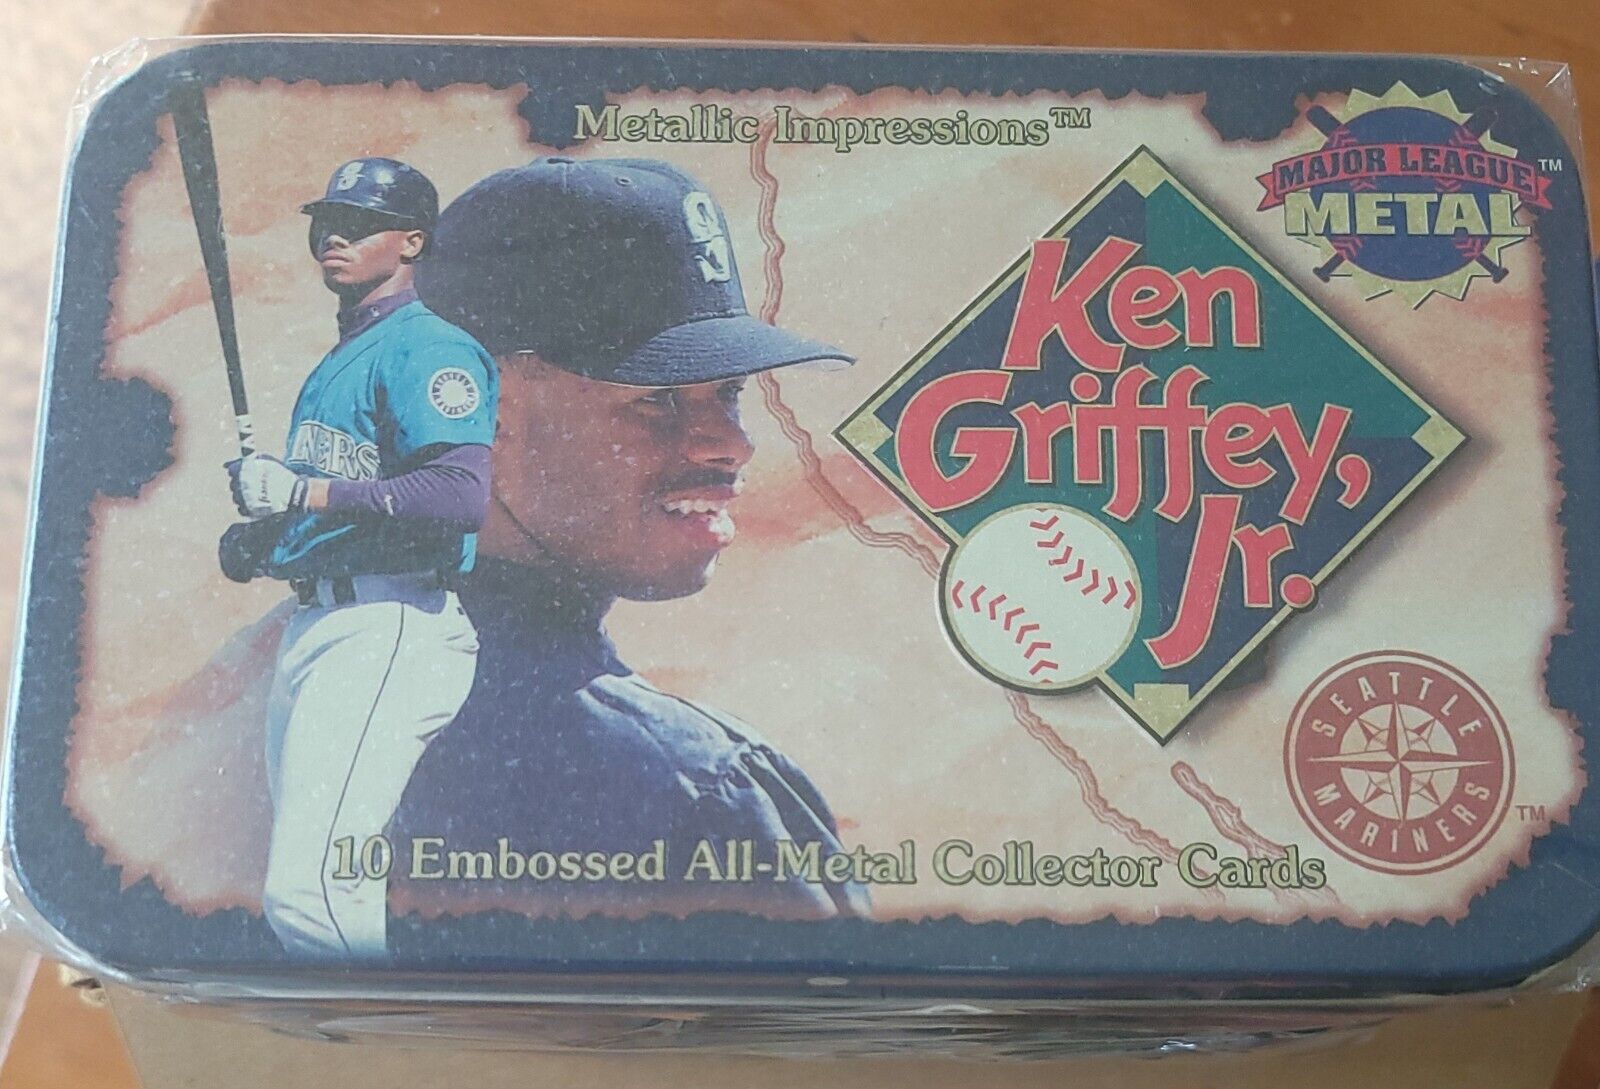 NEW SEALED KEN GRIFFEY JR METALLIC IMPRESSIONS ALL-METAL COLLECTOR 10 CARD TIN  